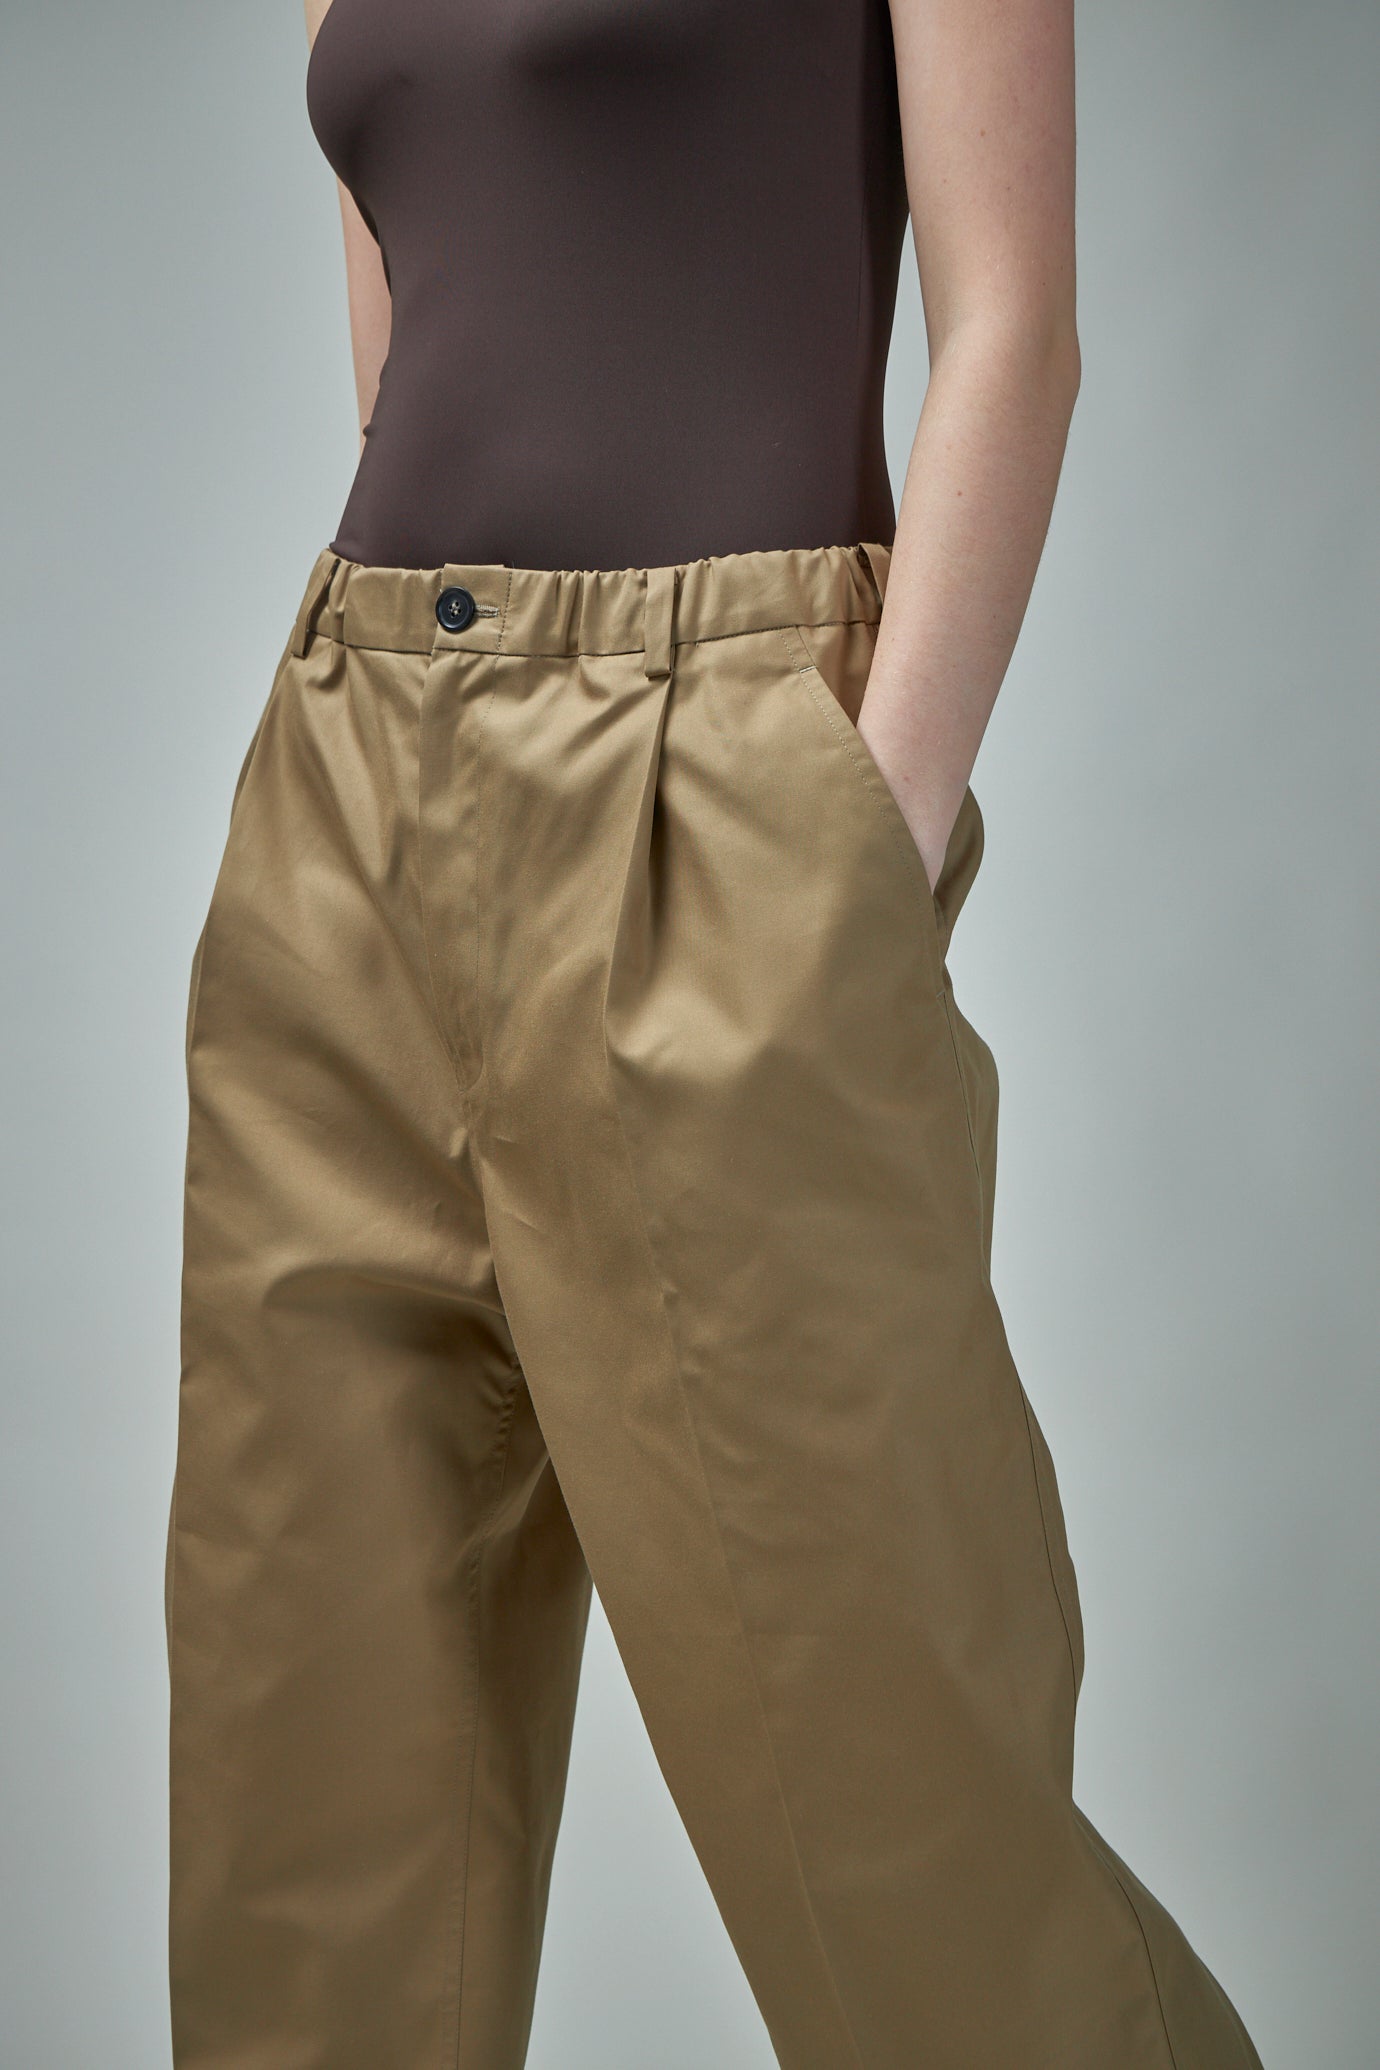 Darted Pants With Elastic Waistband Woven